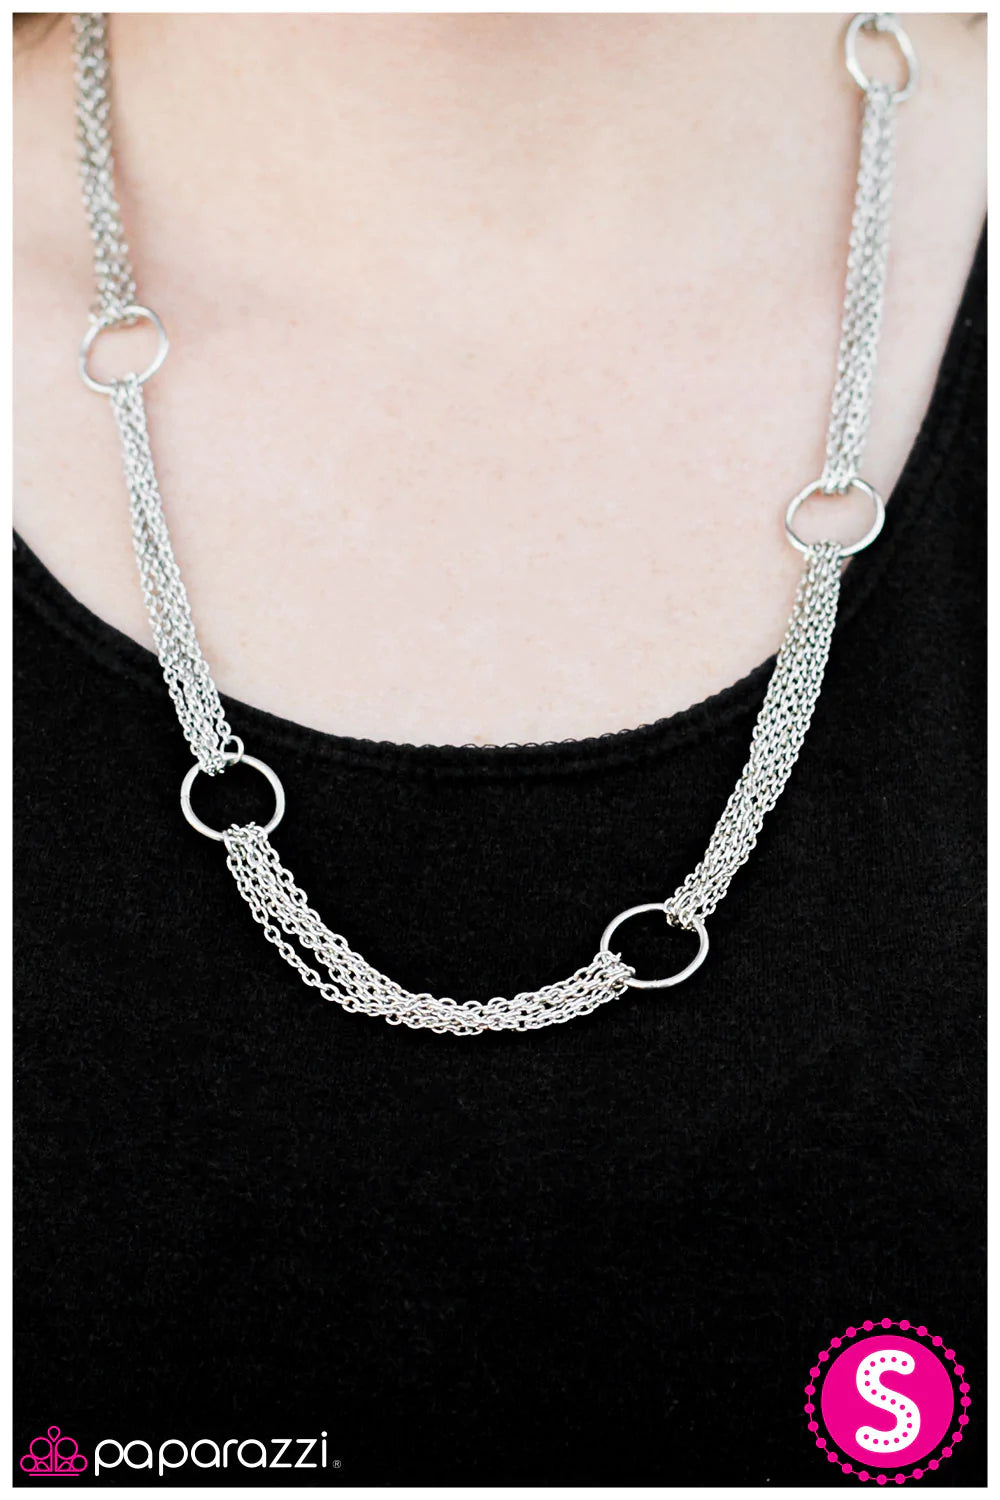 Paparazzi Necklace ~ Chain Lightning  - Silver